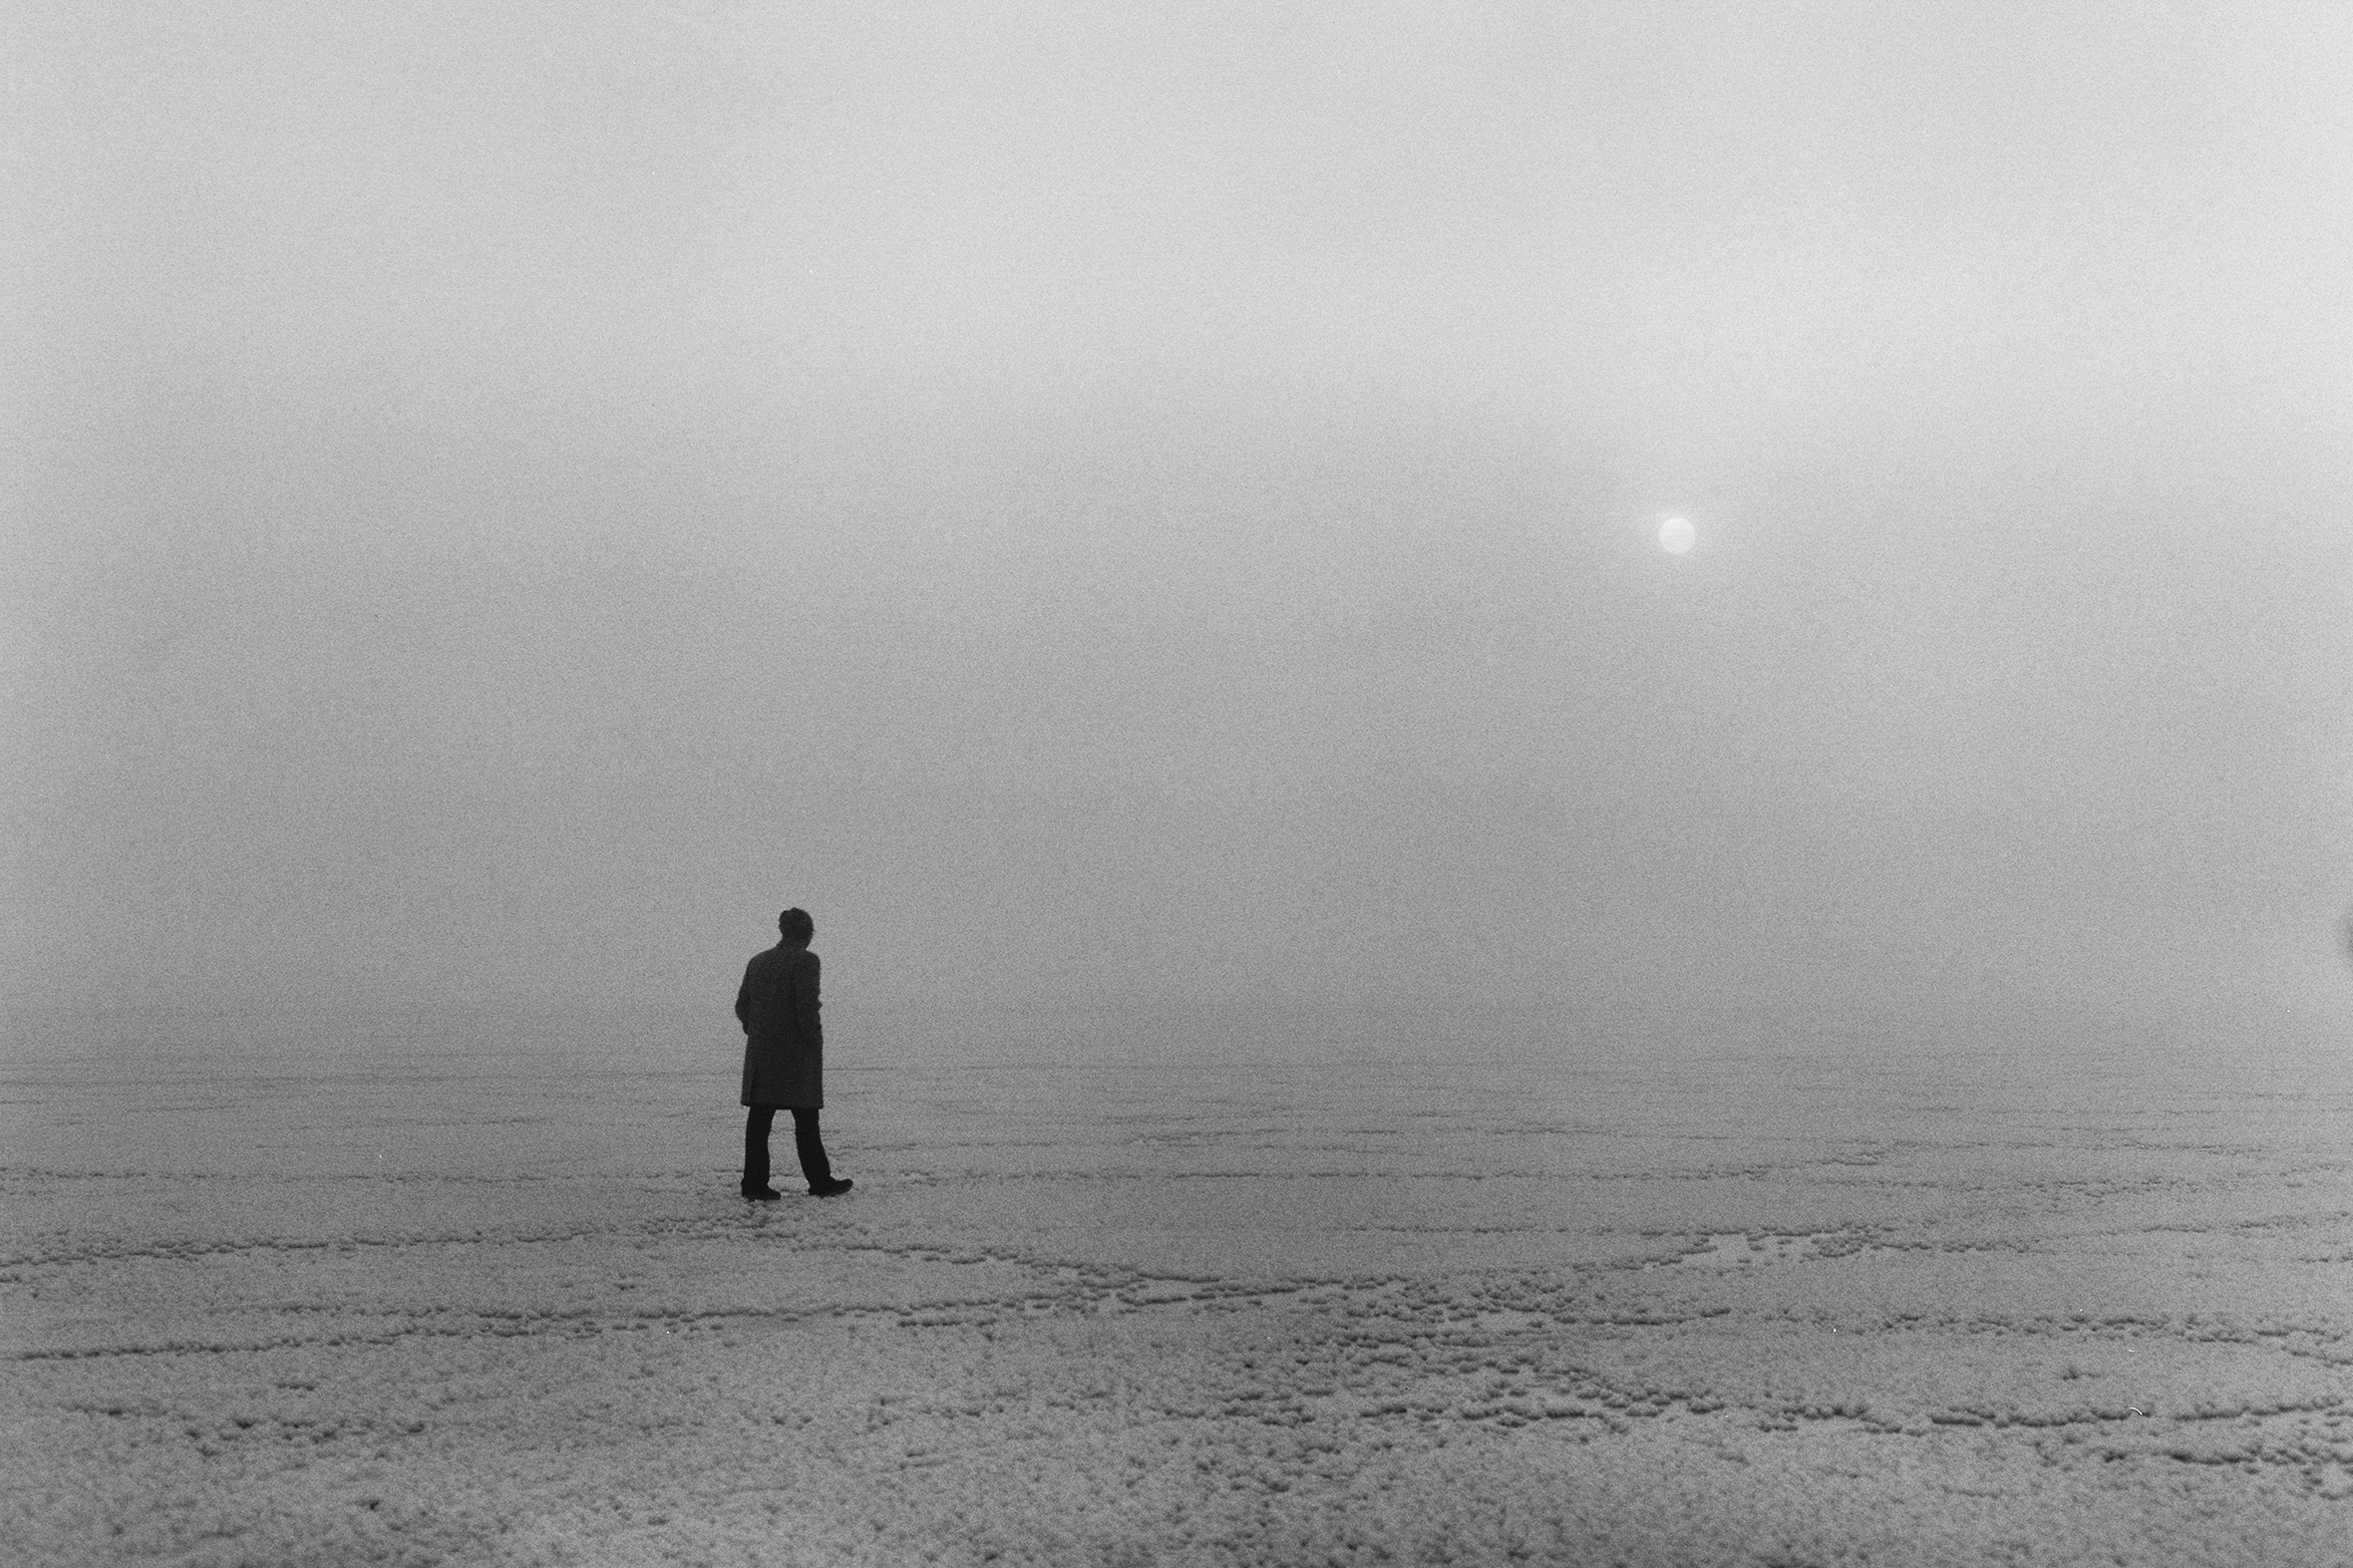 A person in a coat is walking in a desolate landscape surrounded by fog with the sun just visible in the haze.